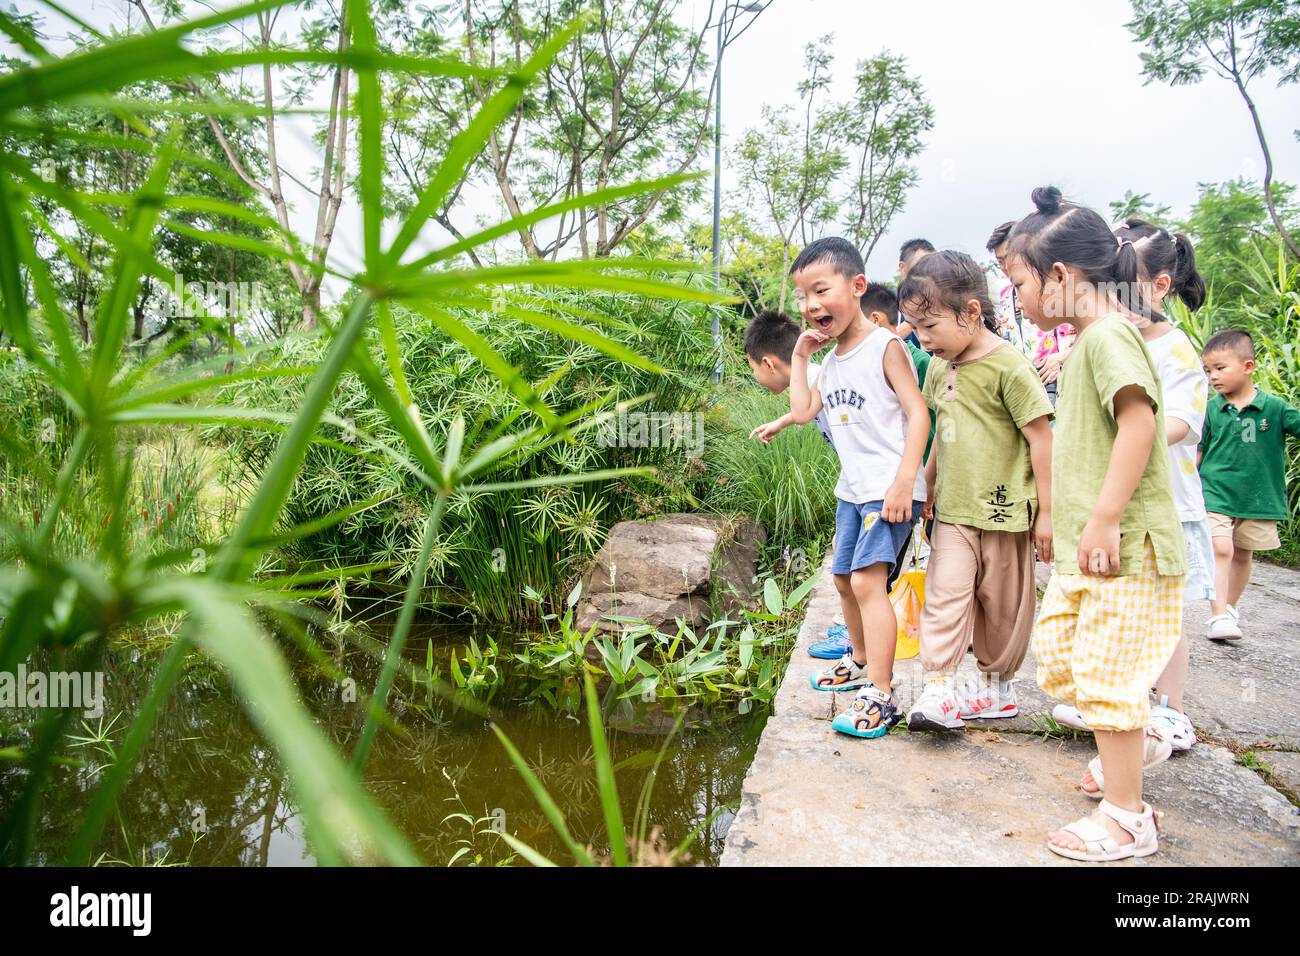 (230704) -- CHONGQING, July 4, 2023 (Xinhua) -- Children learn to identify aquatic organisms during an ecological education tour on Guangyang Isle in southwest China's Chongqing, July 3, 2023. Located at the most extensive green island in the upper reaches of the Yangtze River, Guangyang Isle, covering around 10 square km, has a vegetation coverage rate of over 90 percent, and 594 species of plants and 452 species of animals have been recorded. But its ecological system and biodiversity were severely damaged due to a number of aggressive real estate projects that had lasted for years. In 2017 Stock Photo